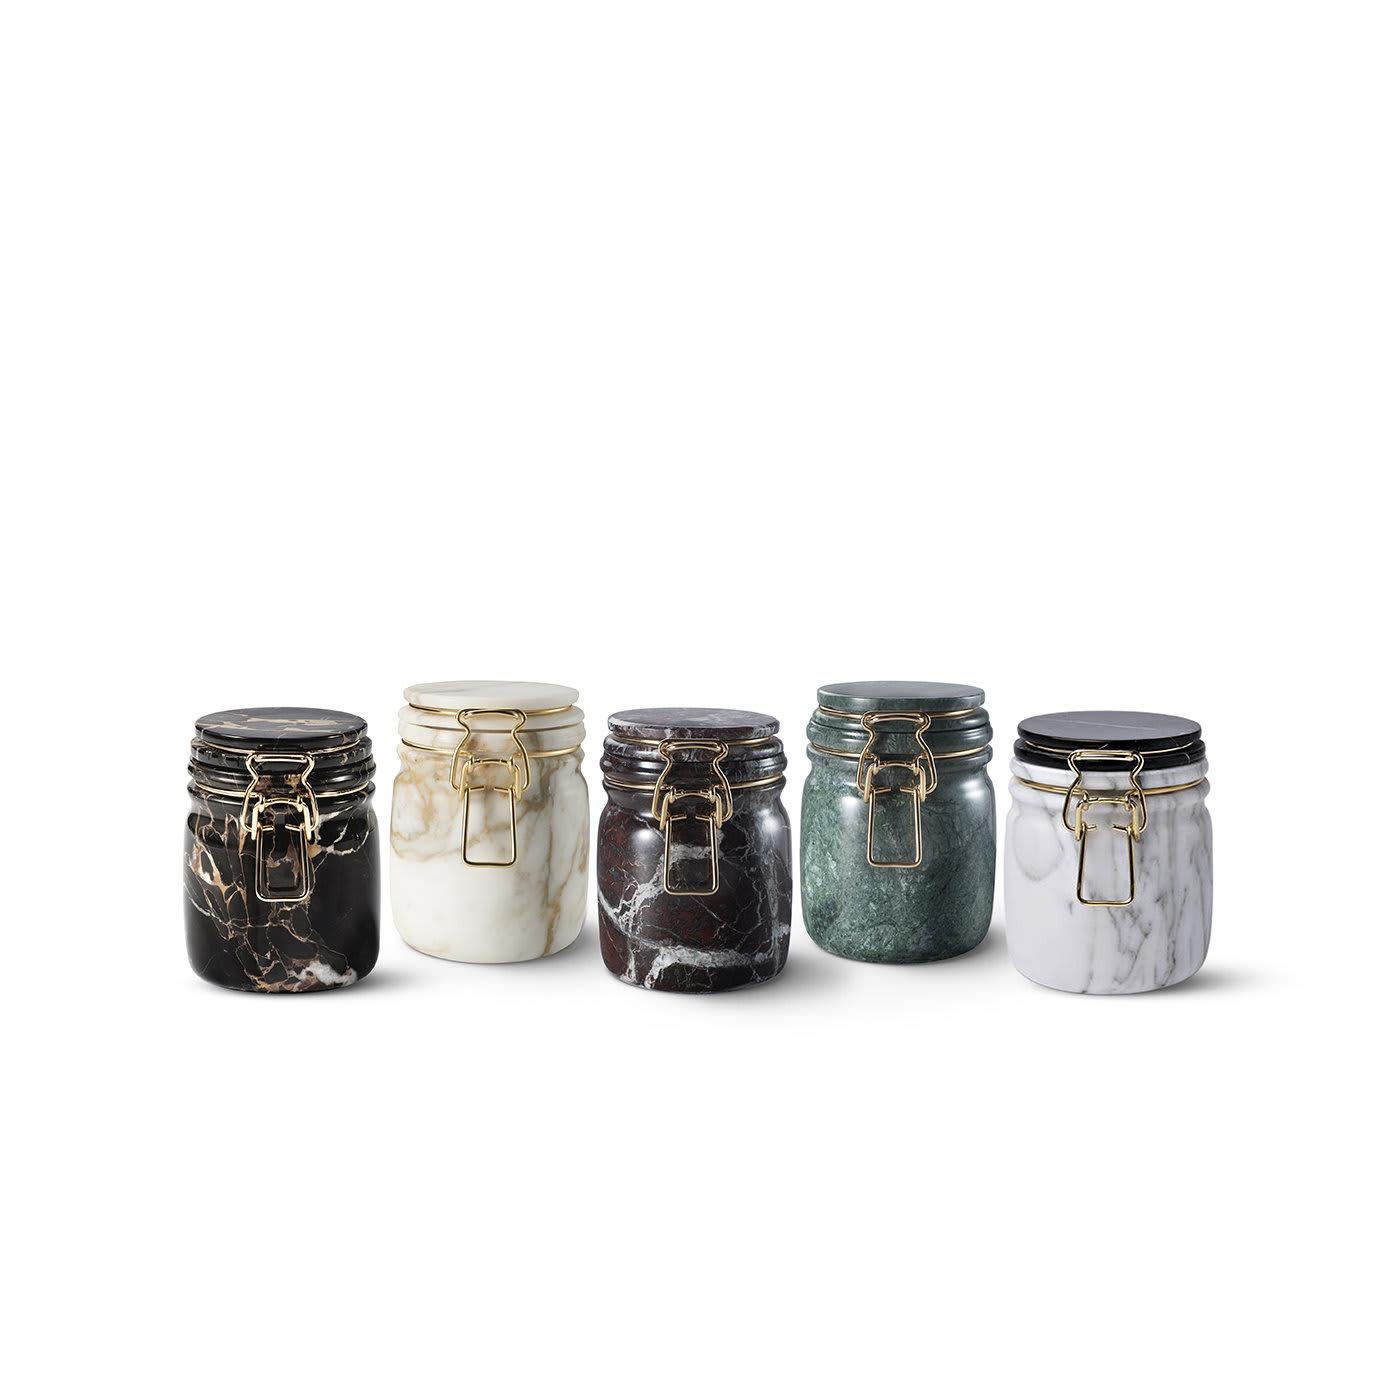 A playful and sophisticated take on the traditional jam jar, this container is crafted using traditional methods and noble materials to add an elegant accent to a kitchen or a living room. The body of the jar is made of opaque Arabescato marble,